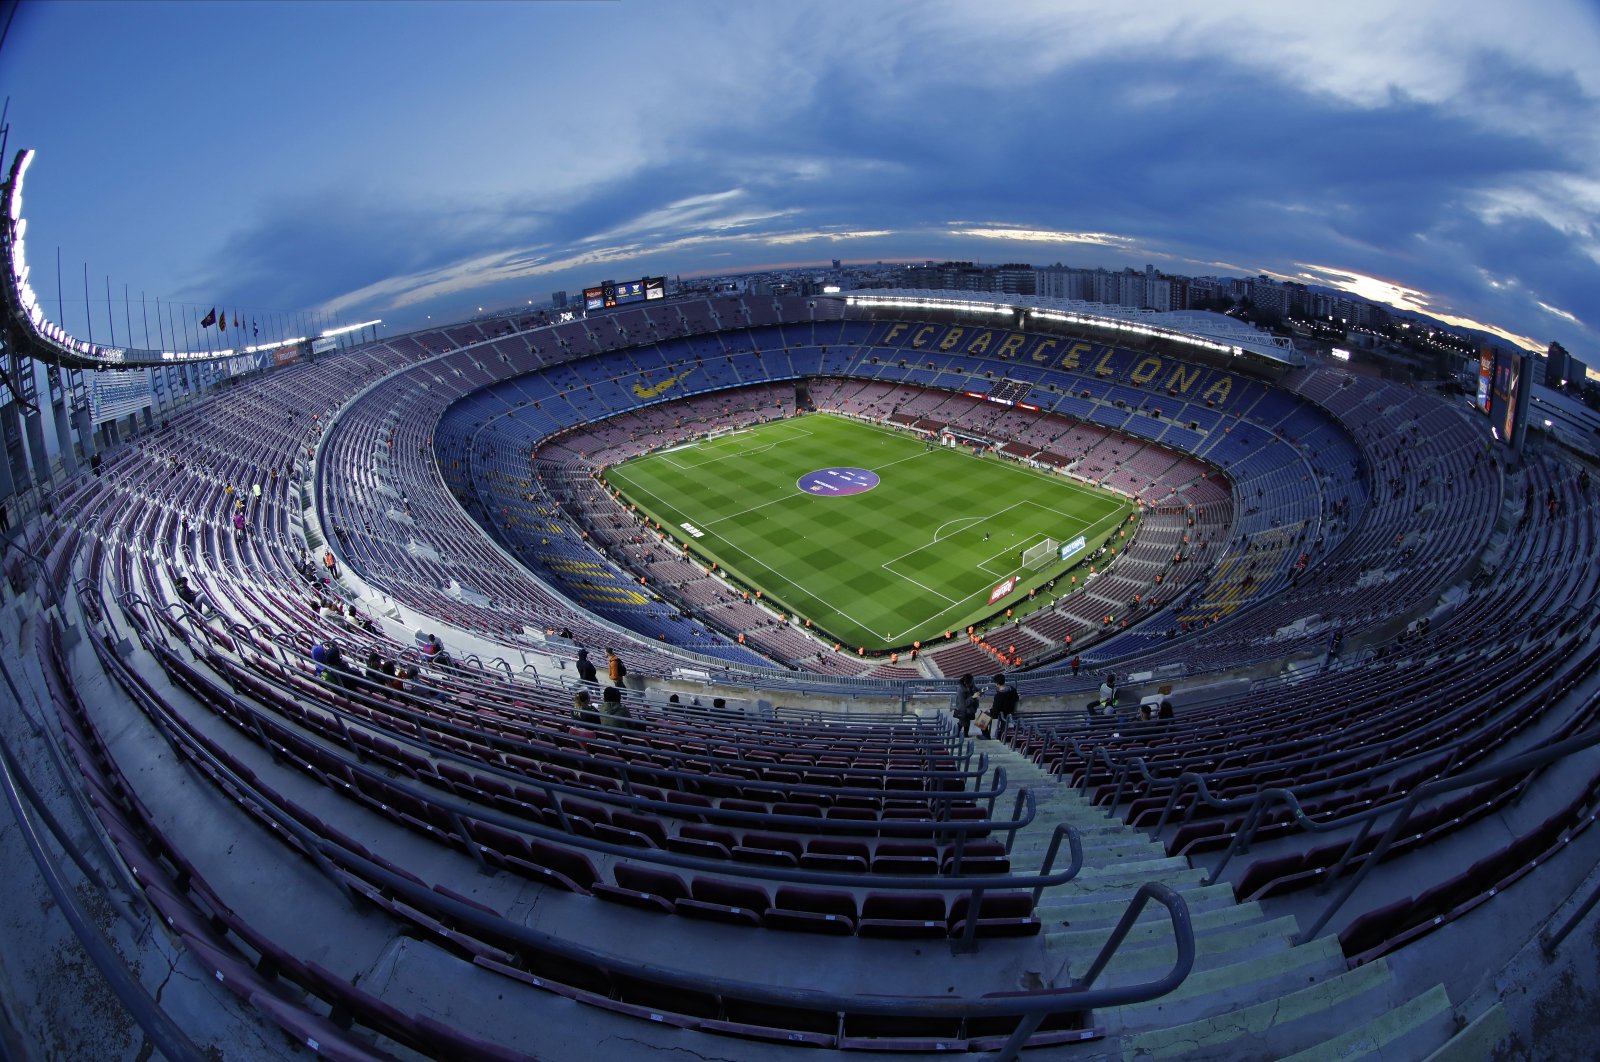 A general view of the Camp Nou stadium prior of a Spanish Copa del Rey football match between Barcelona and Leganes at the Camp Nou stadium in Barcelona, Spain, Jan. 30, 2020. (AP Photo)